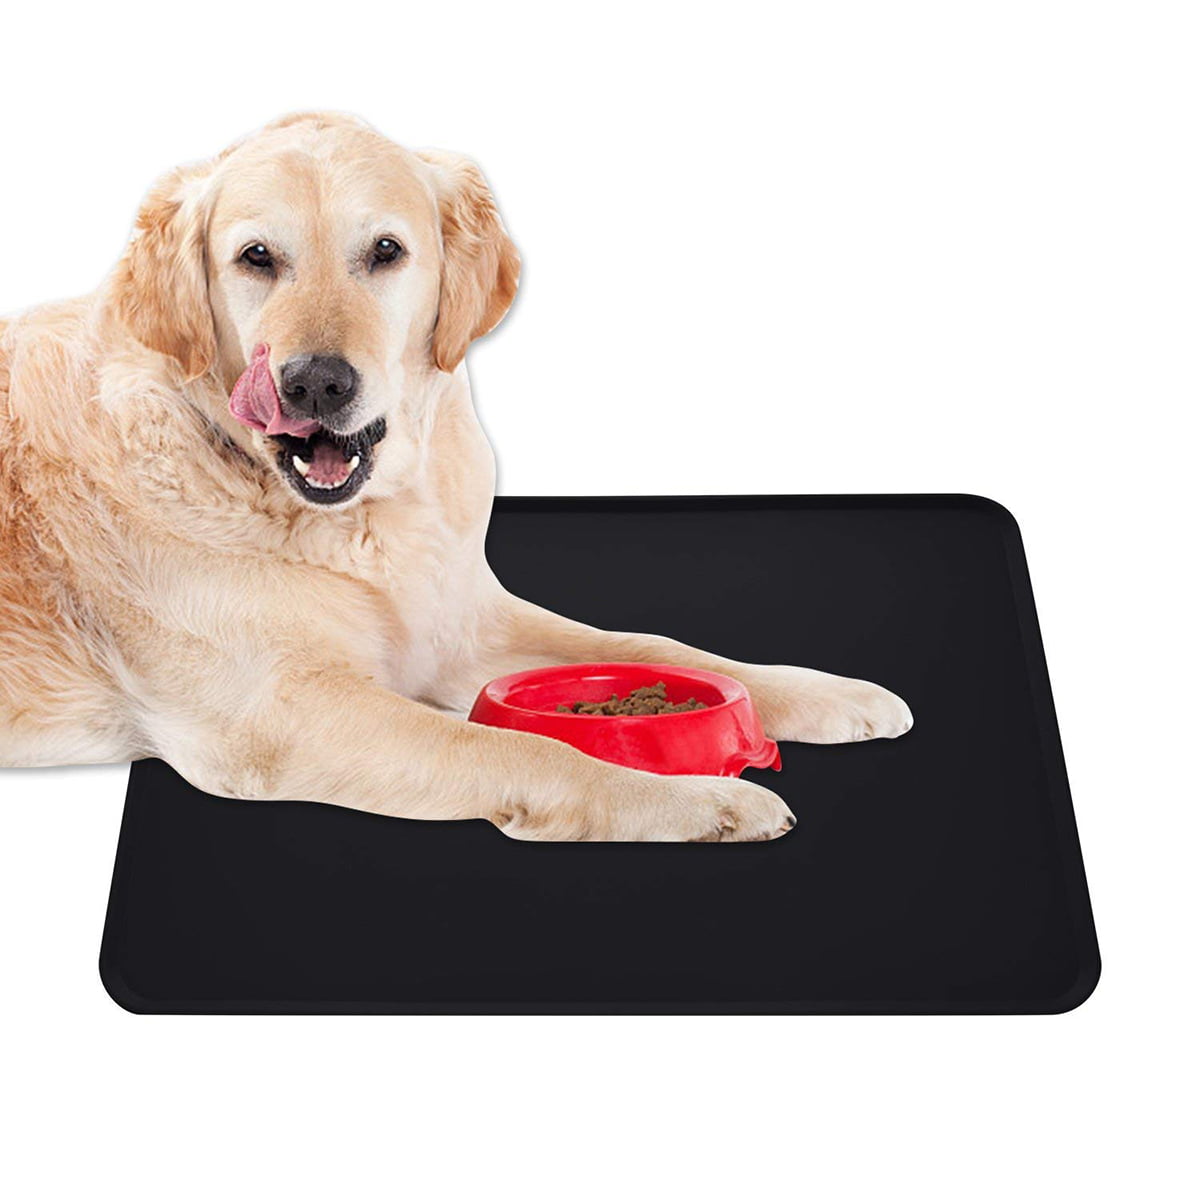 Ogquaton Silicone Pet Feeding Mat Dog Cat Placemat Bowl Mat Tray with Raised Edge Grey Waterproof Non Slip Non Spills Pet Feeder Pad